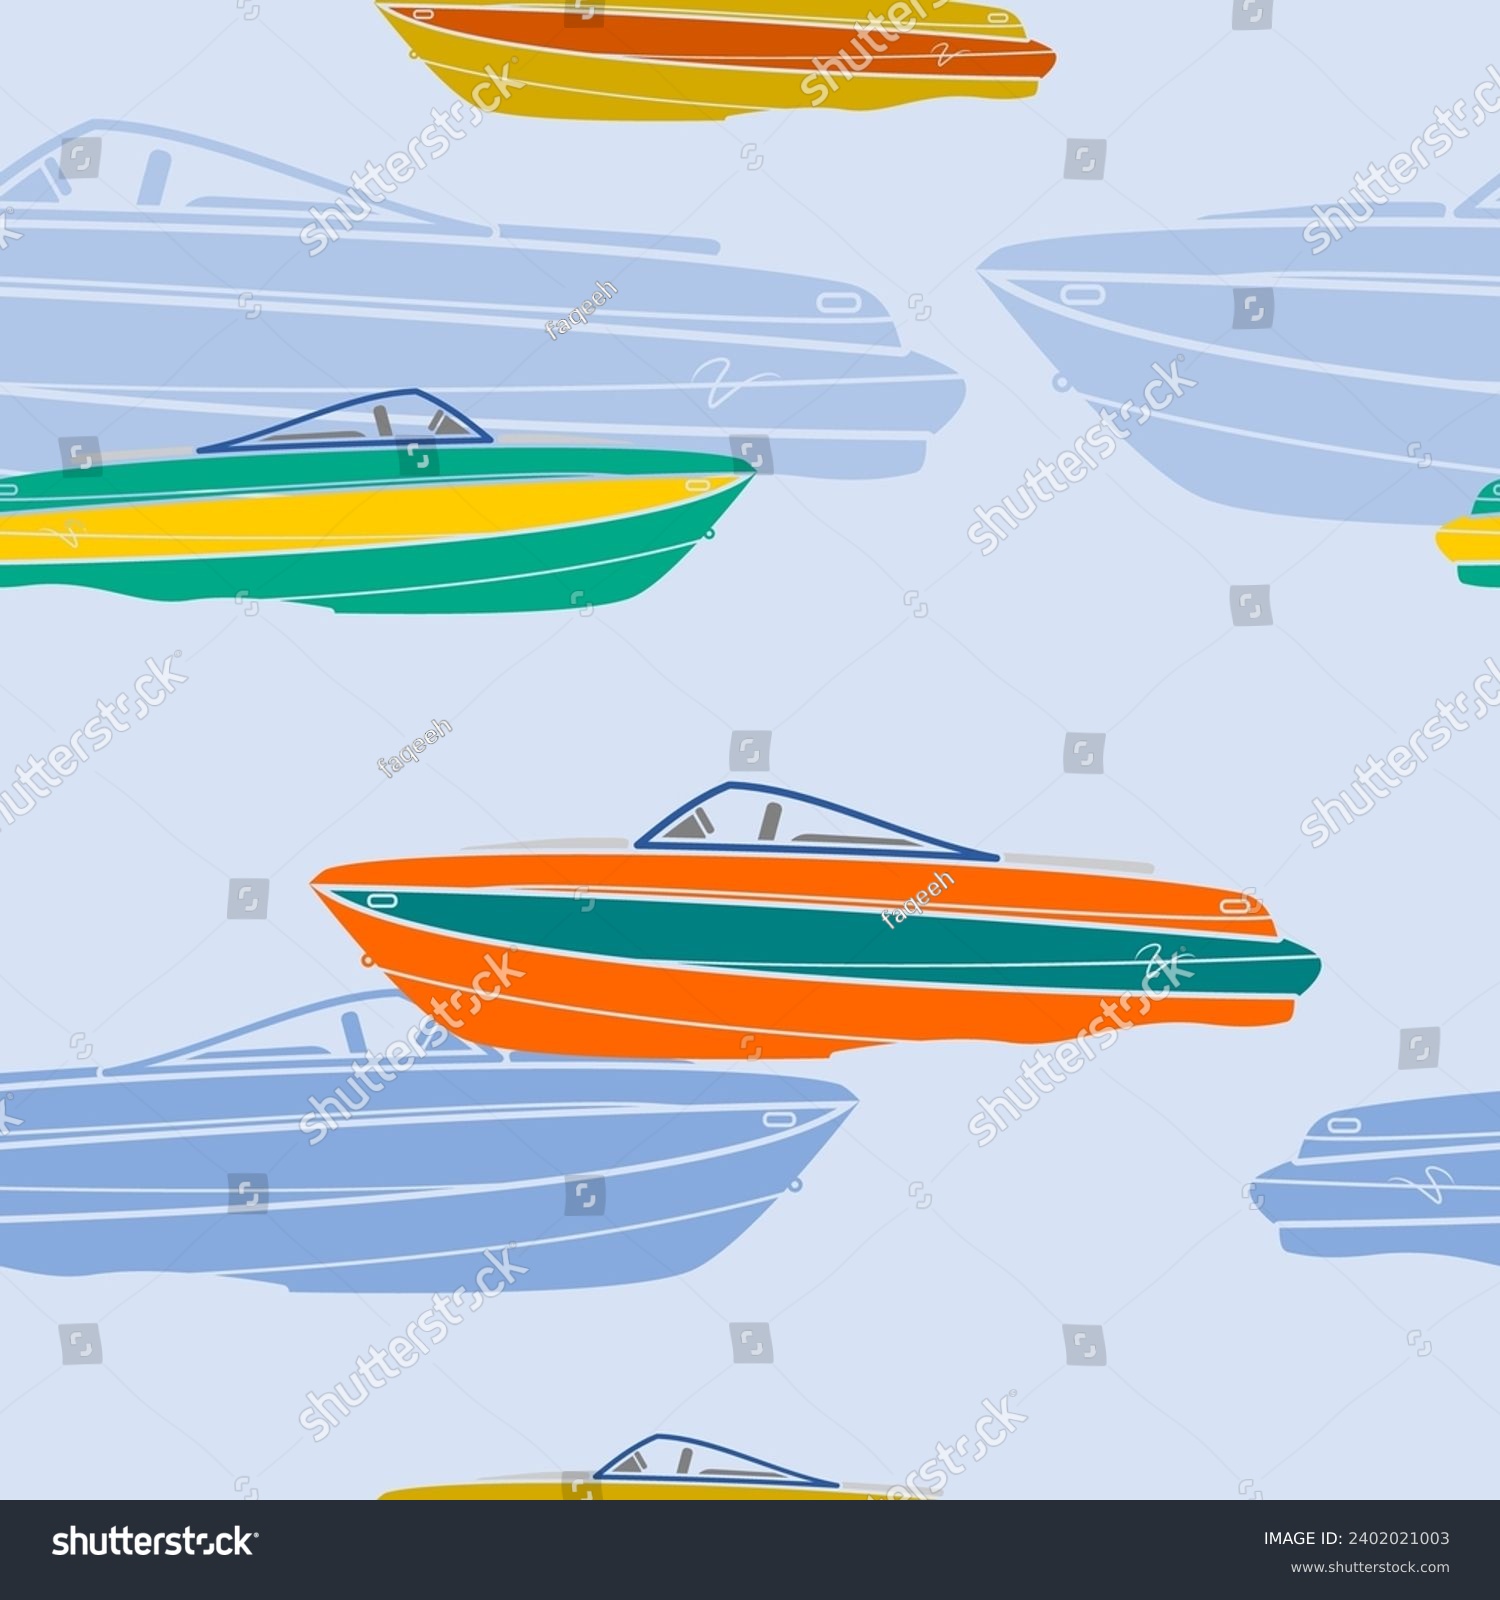 SVG of Editable Various Colors Side View American Bowrider Boats on Water Vector Illustration as Seamless Pattern for Creating Background of Transportation or Recreation Related Design svg